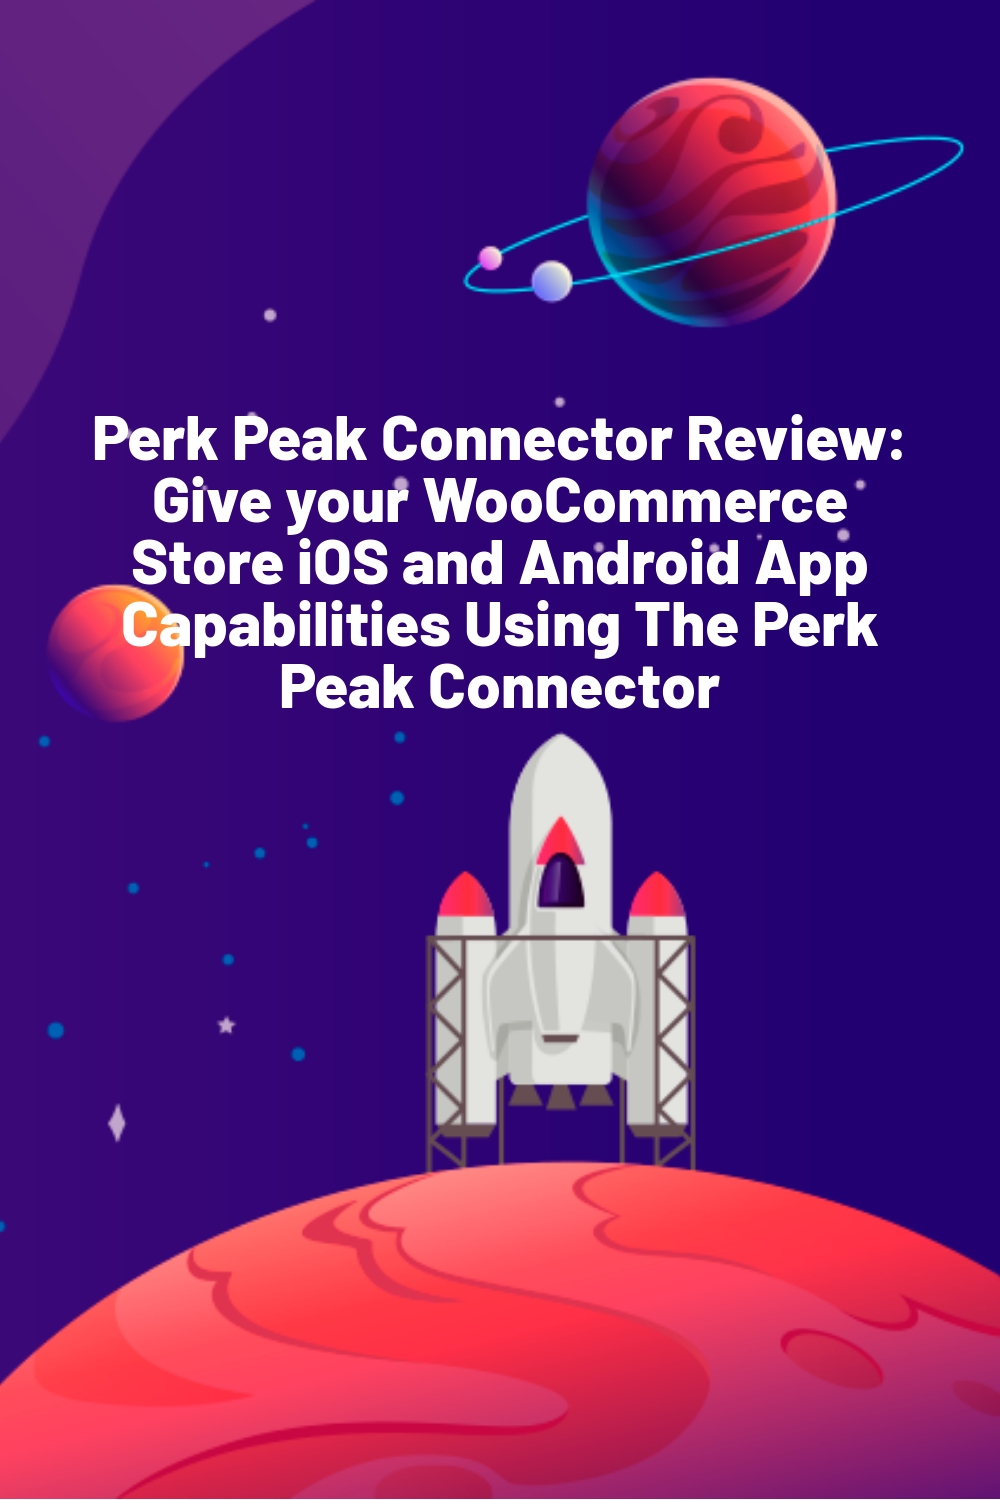 Perk Peak Connector Review: Give your WooCommerce Store iOS and Android App Capabilities Using The Perk Peak Connector